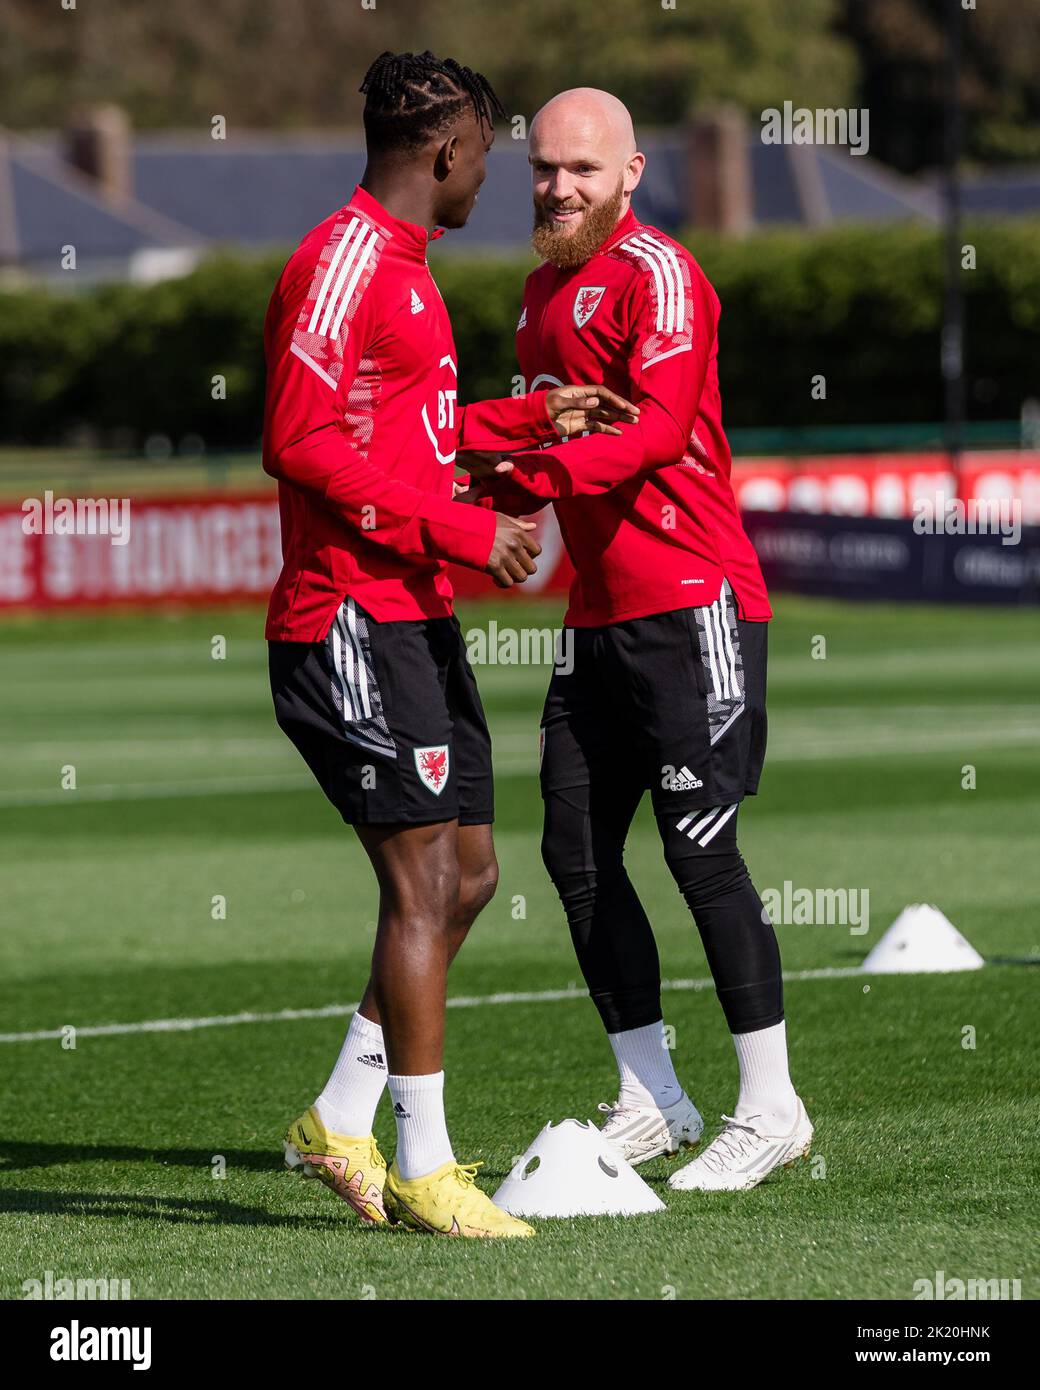 PONTYCLUN, WALES - 21 SEPTEMBER 2022: Wales' Rabbi Matondo and Wales' Jonny Williams  during a training session at the vale resort ahead of the league Stock Photo